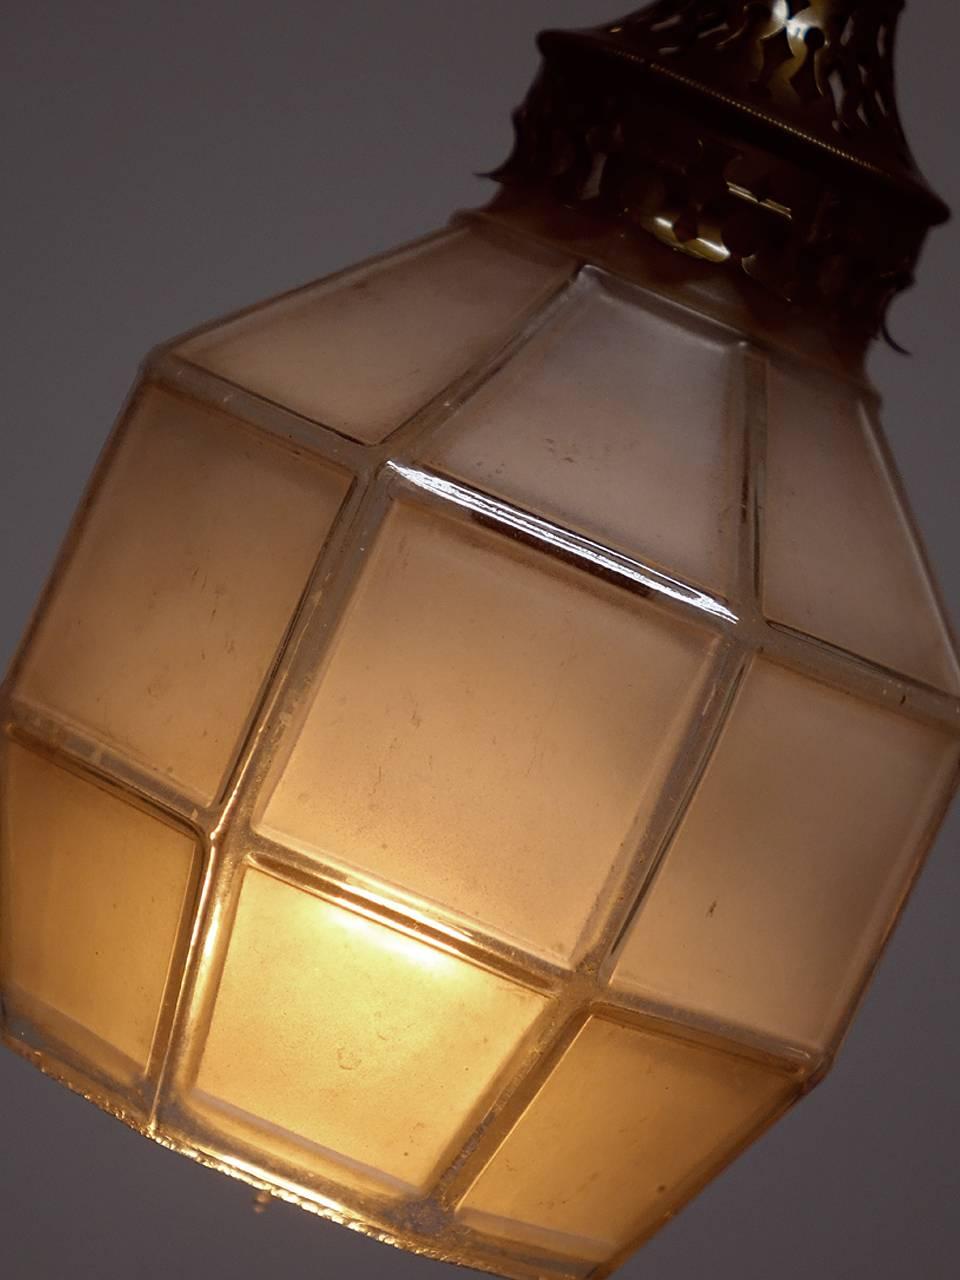 These delicate and early Arts & Crafts style shades were originally used for gas lamps. We rewired each using the original brass fittings to take a candelabra bulb. The glass is cast in one piece but looks like leaded glass panels. We have priced